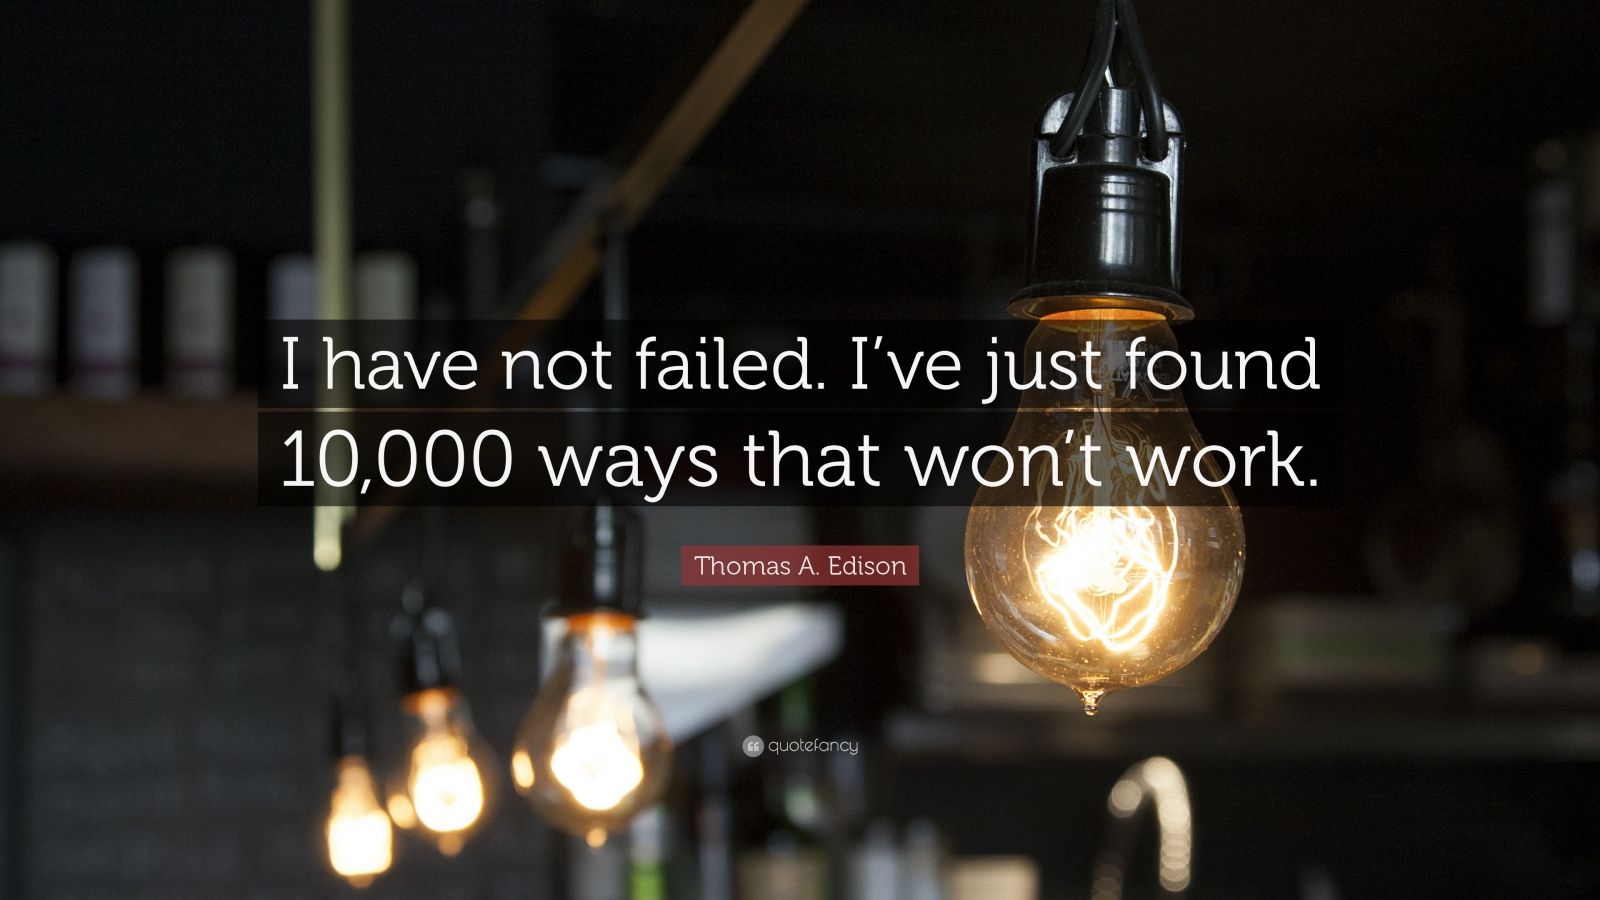 Thomas A. Edison Quotes (20 wallpapers) Quotefancy